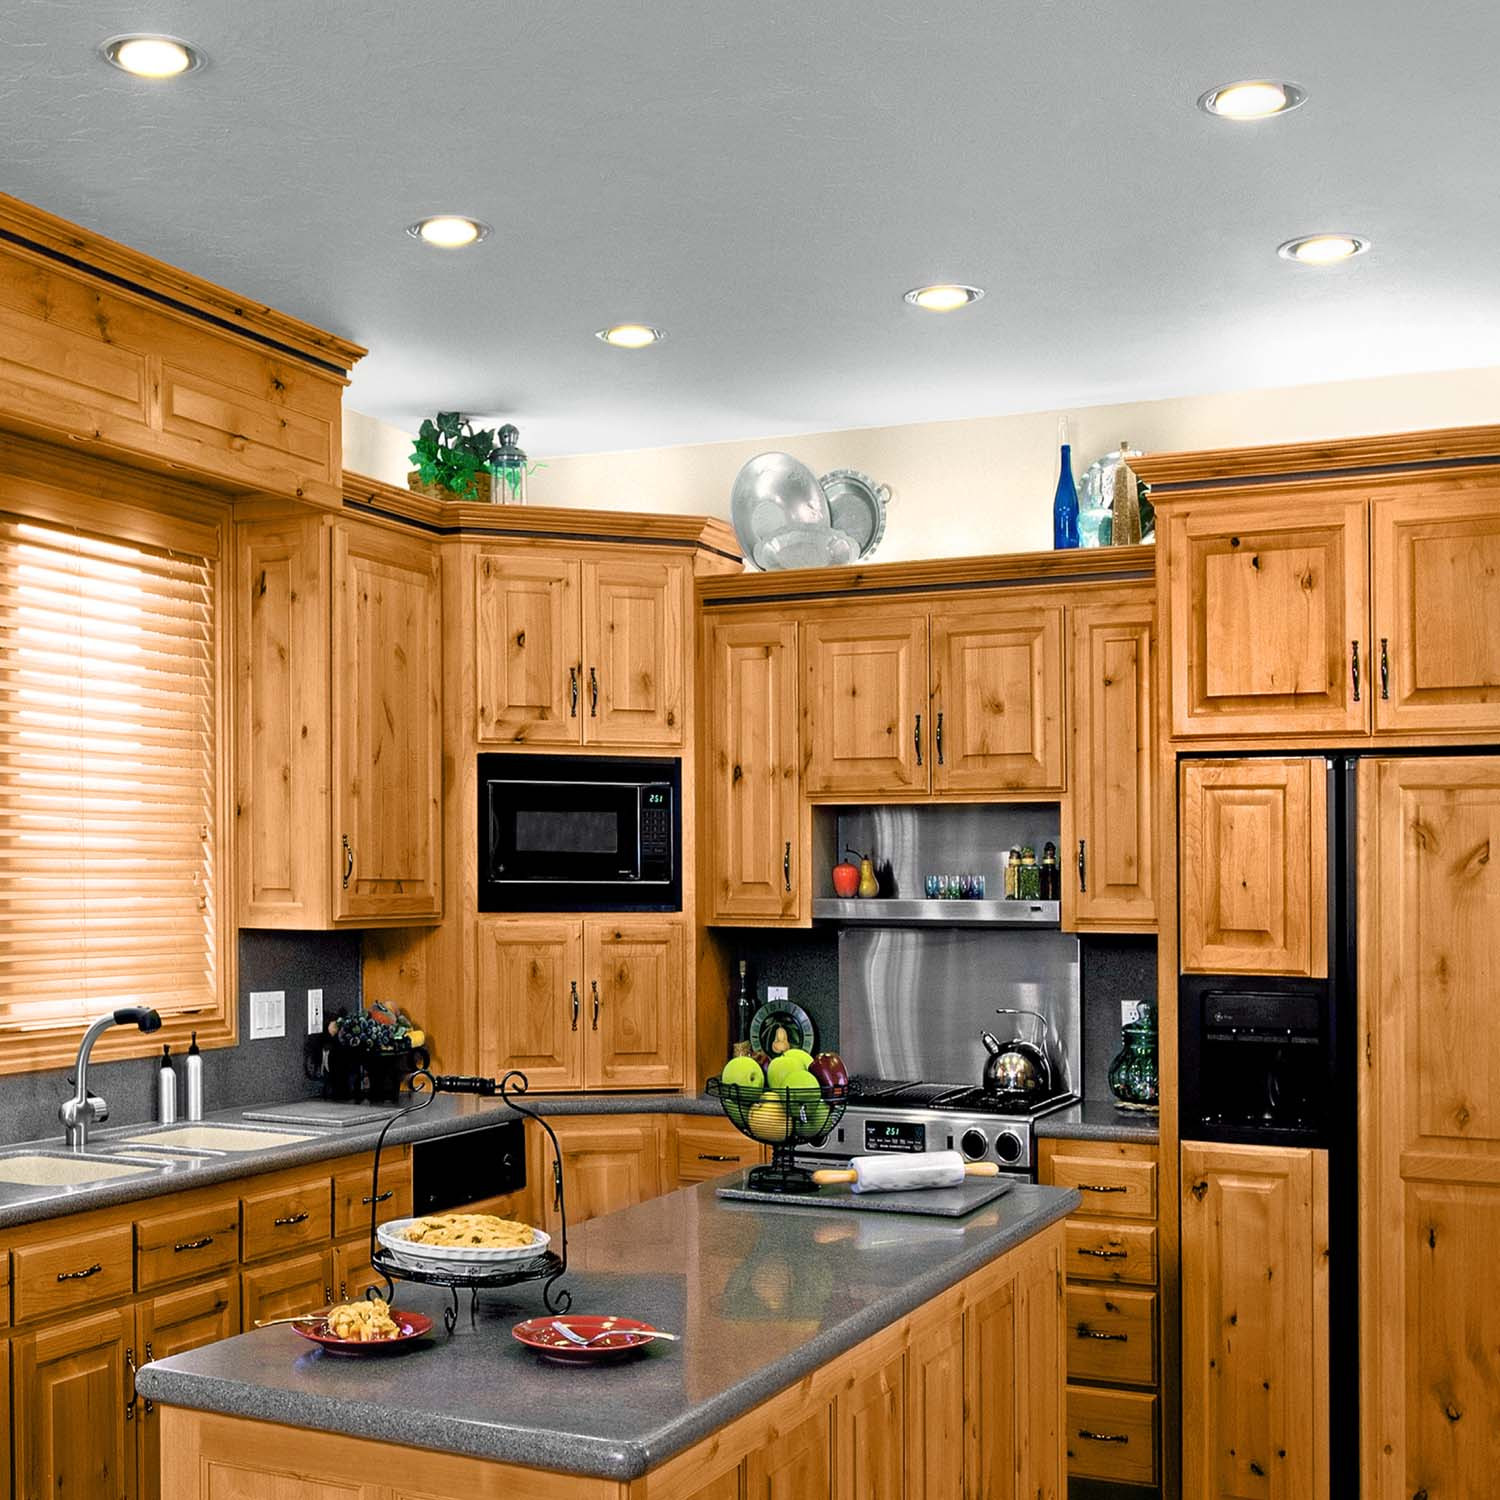 Recessed Lighting In Kitchens
 10 benefits of Led ceiling recessed lights